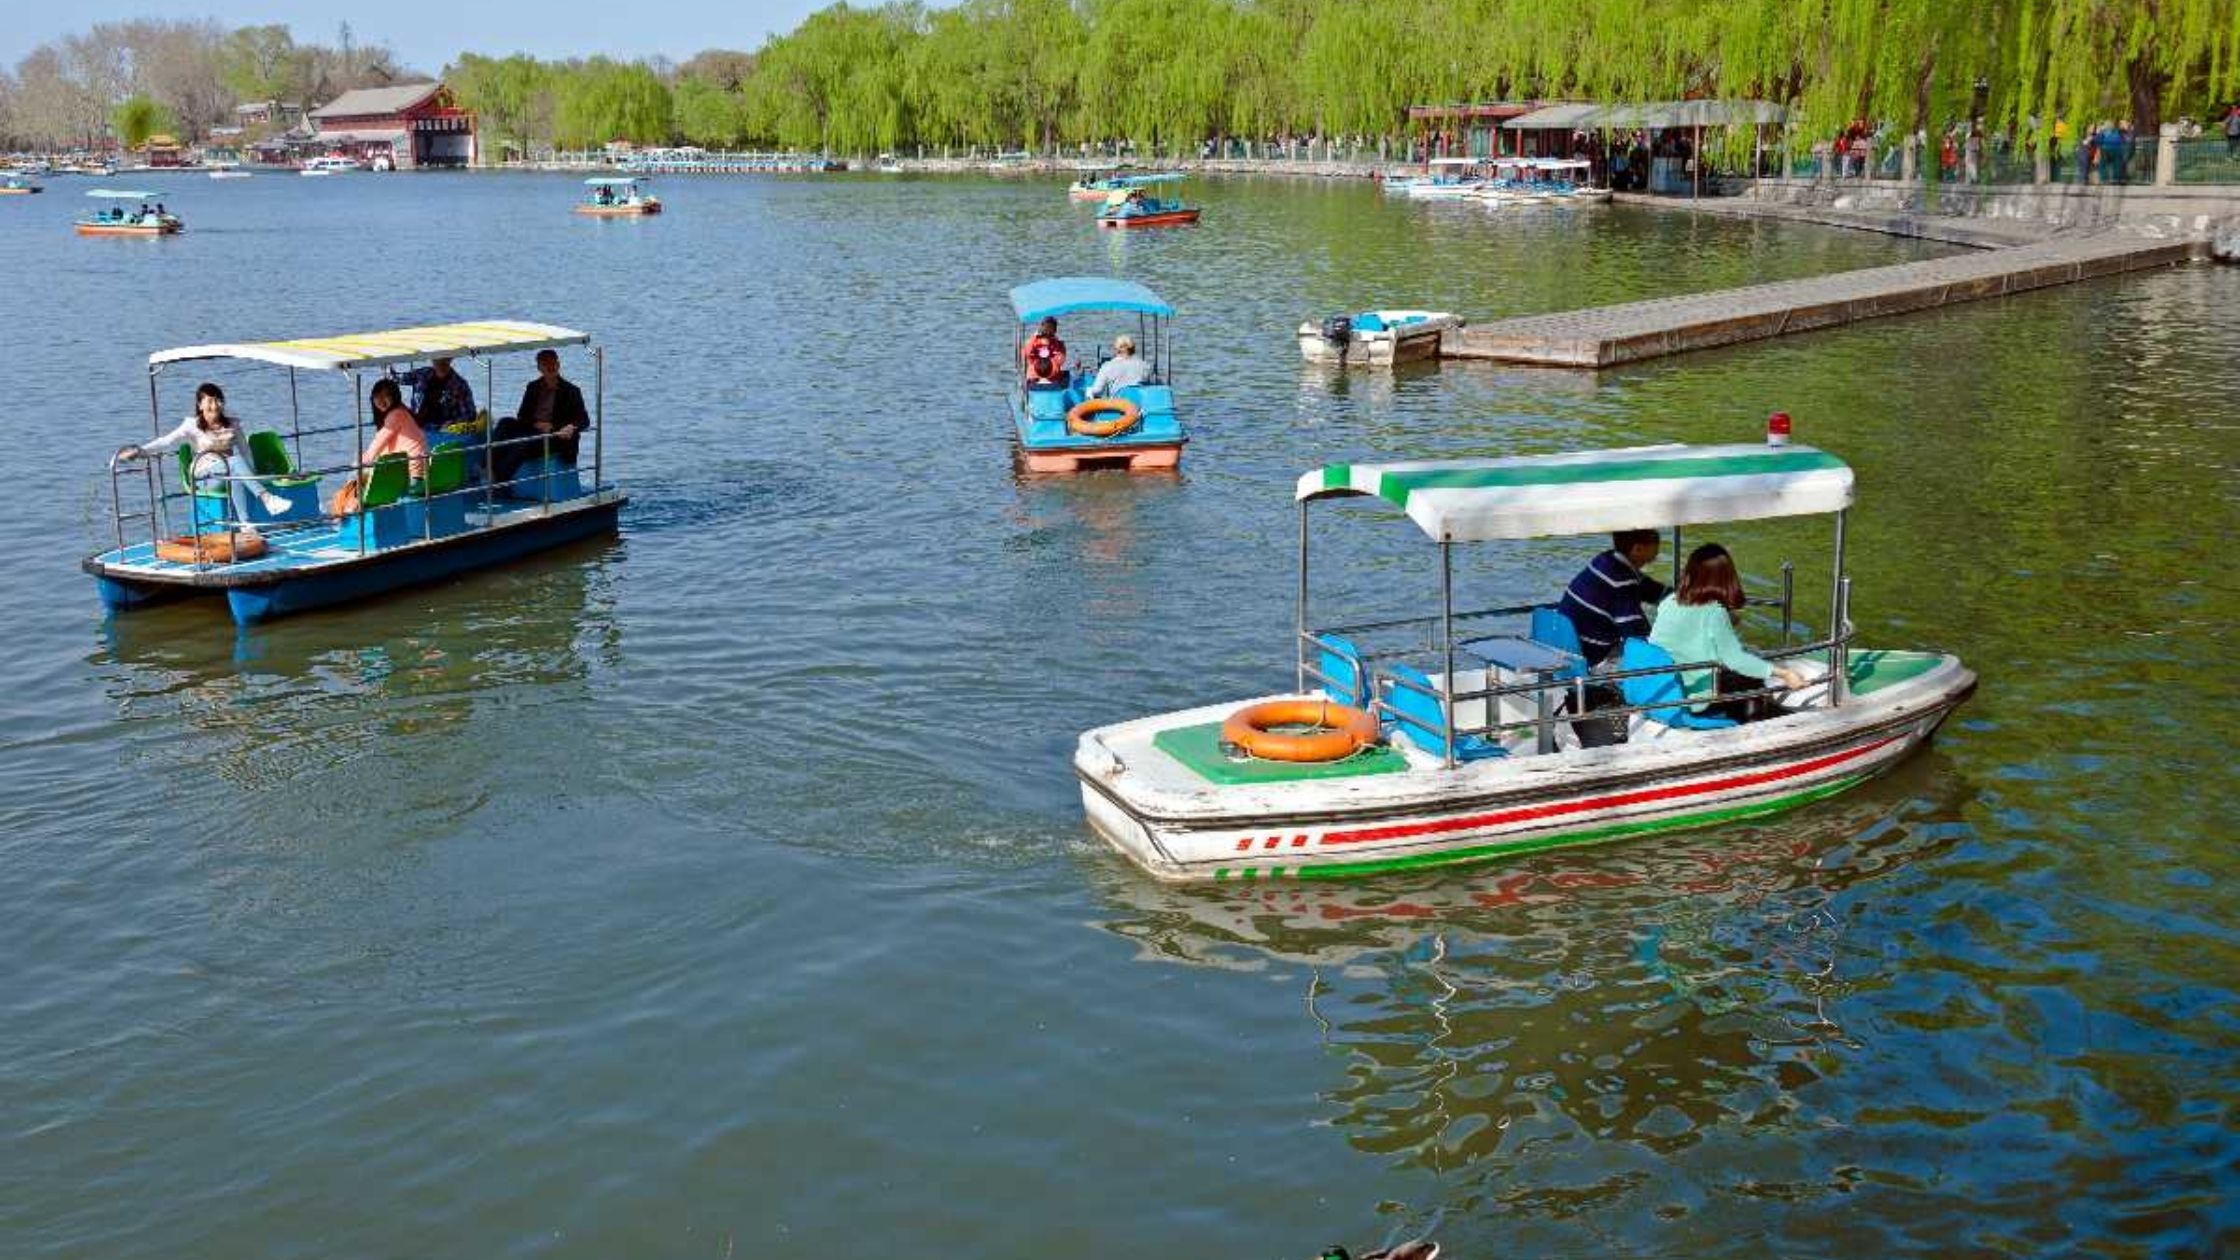 Enjoy boating with natural beauty in this district of Bihar